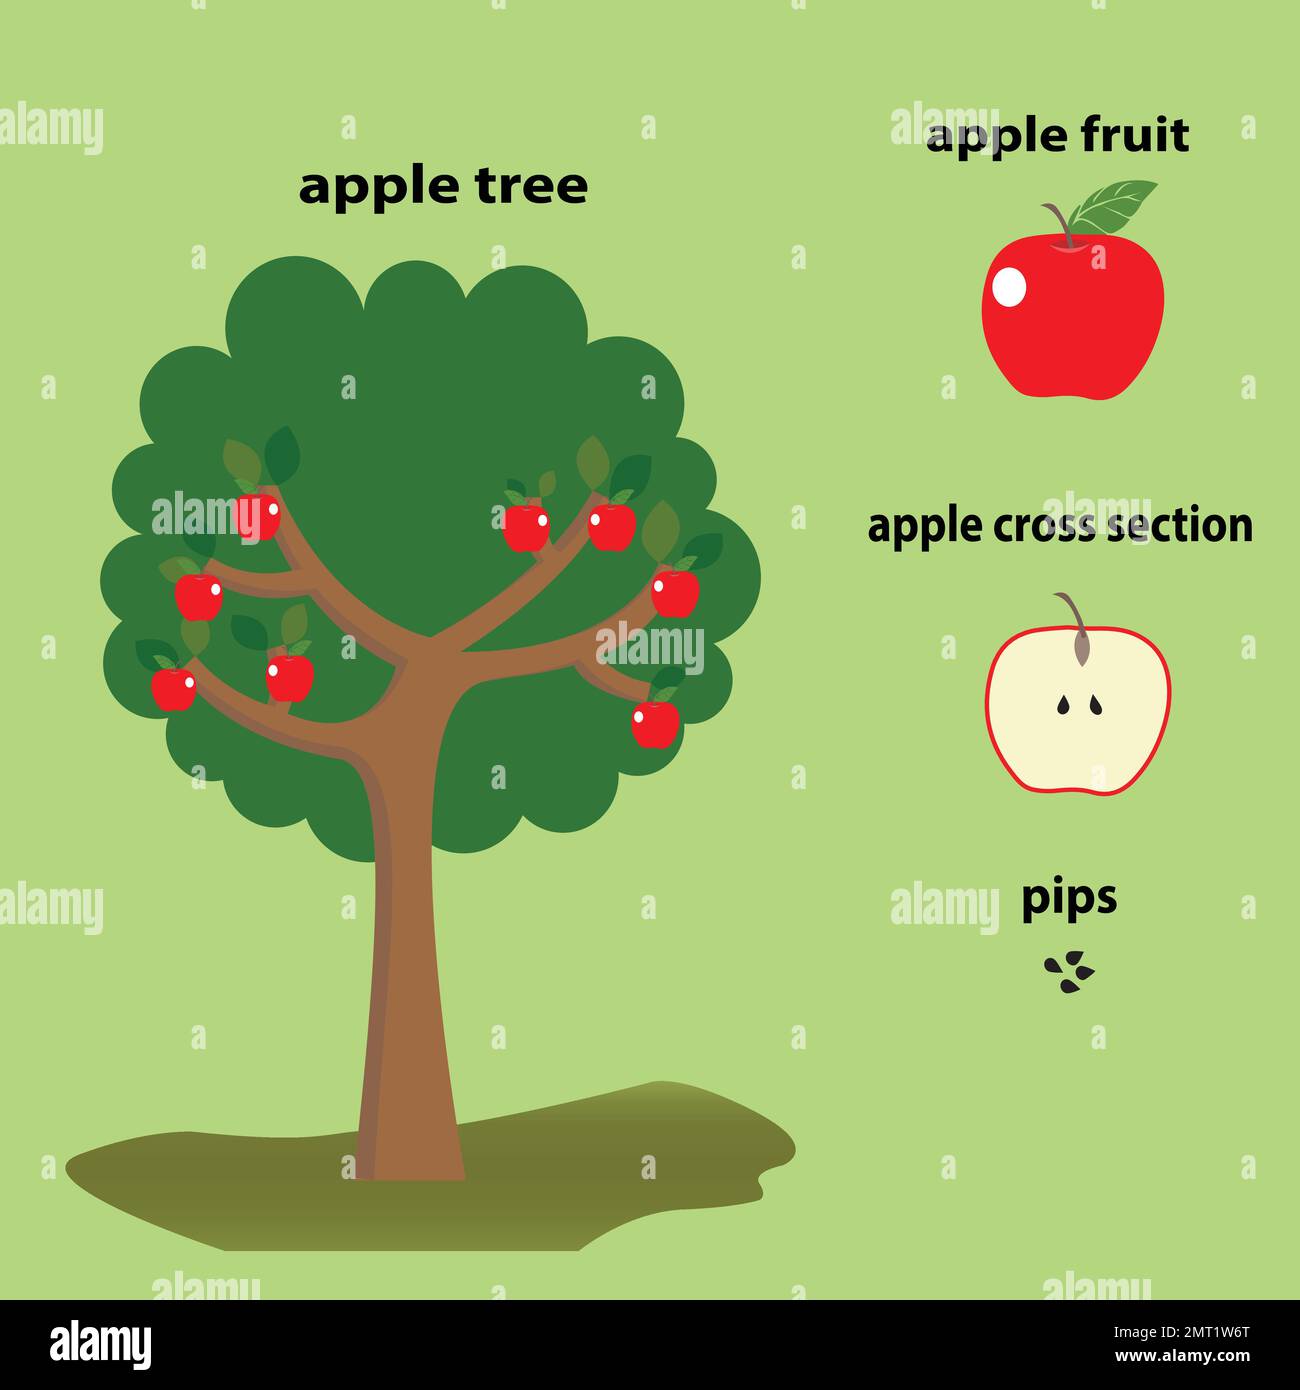 Apple education teaching resources with apple tree, apple fruit and pips Stock Vector